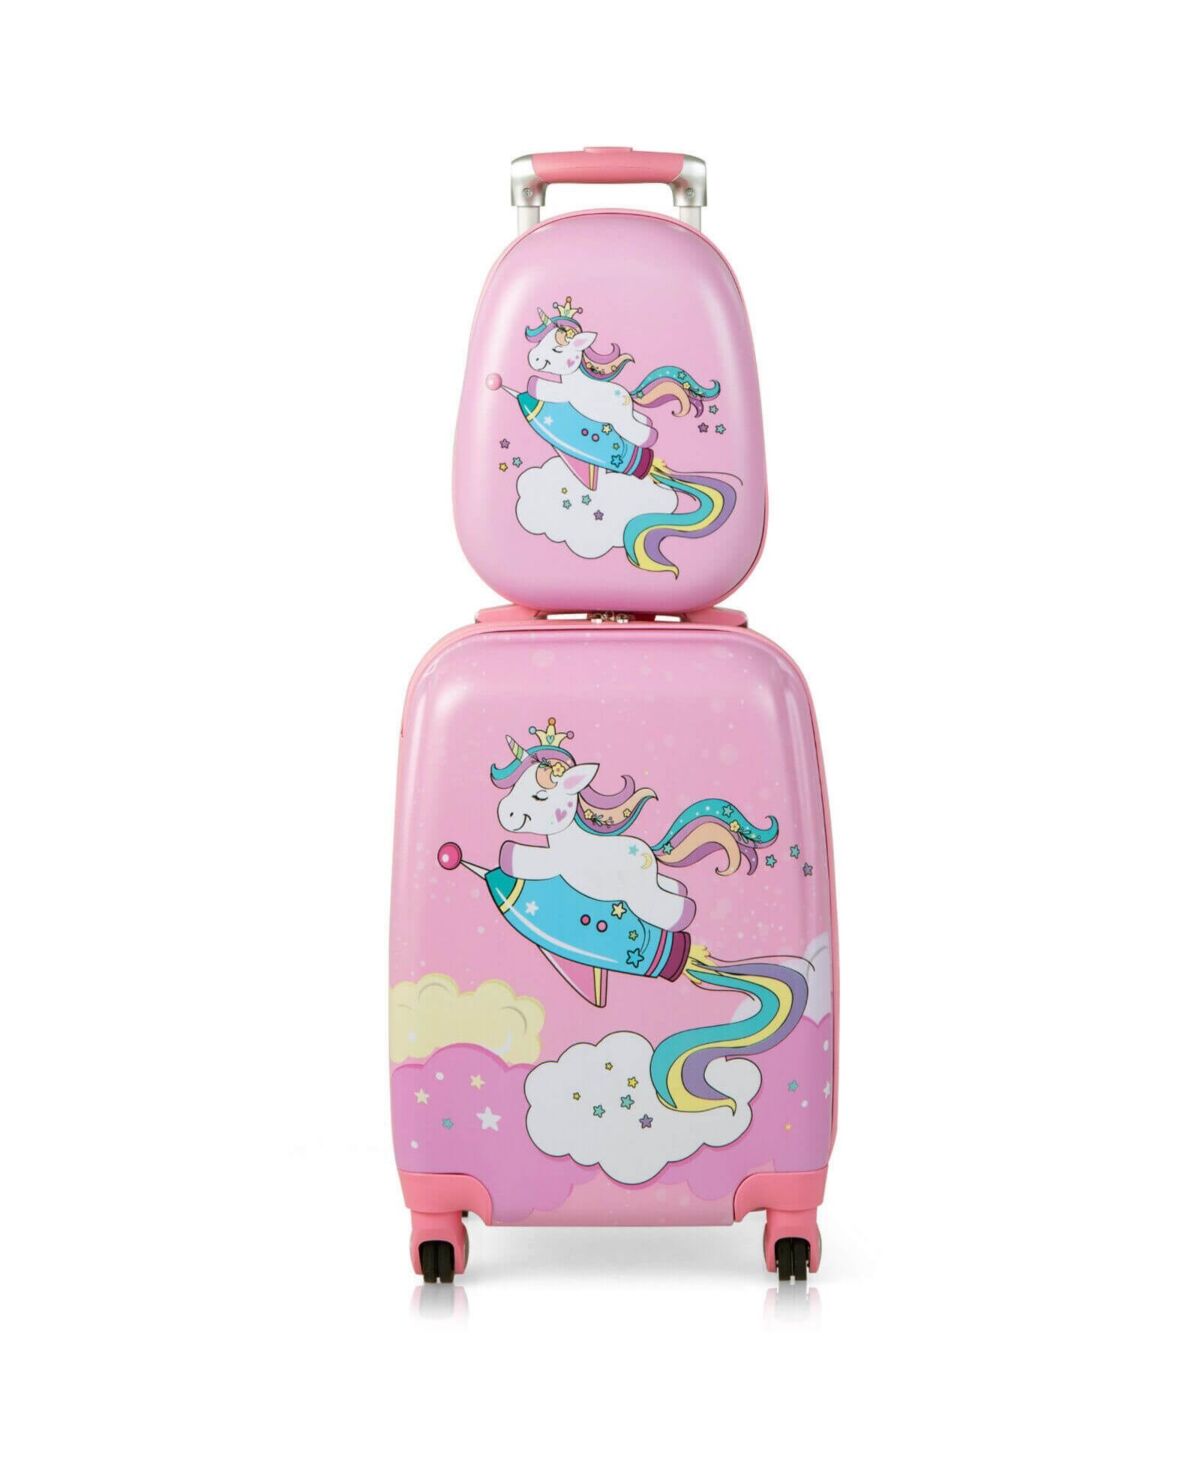 Slickblue 2 Pieces Kids Luggage Set with Backpack - Pink